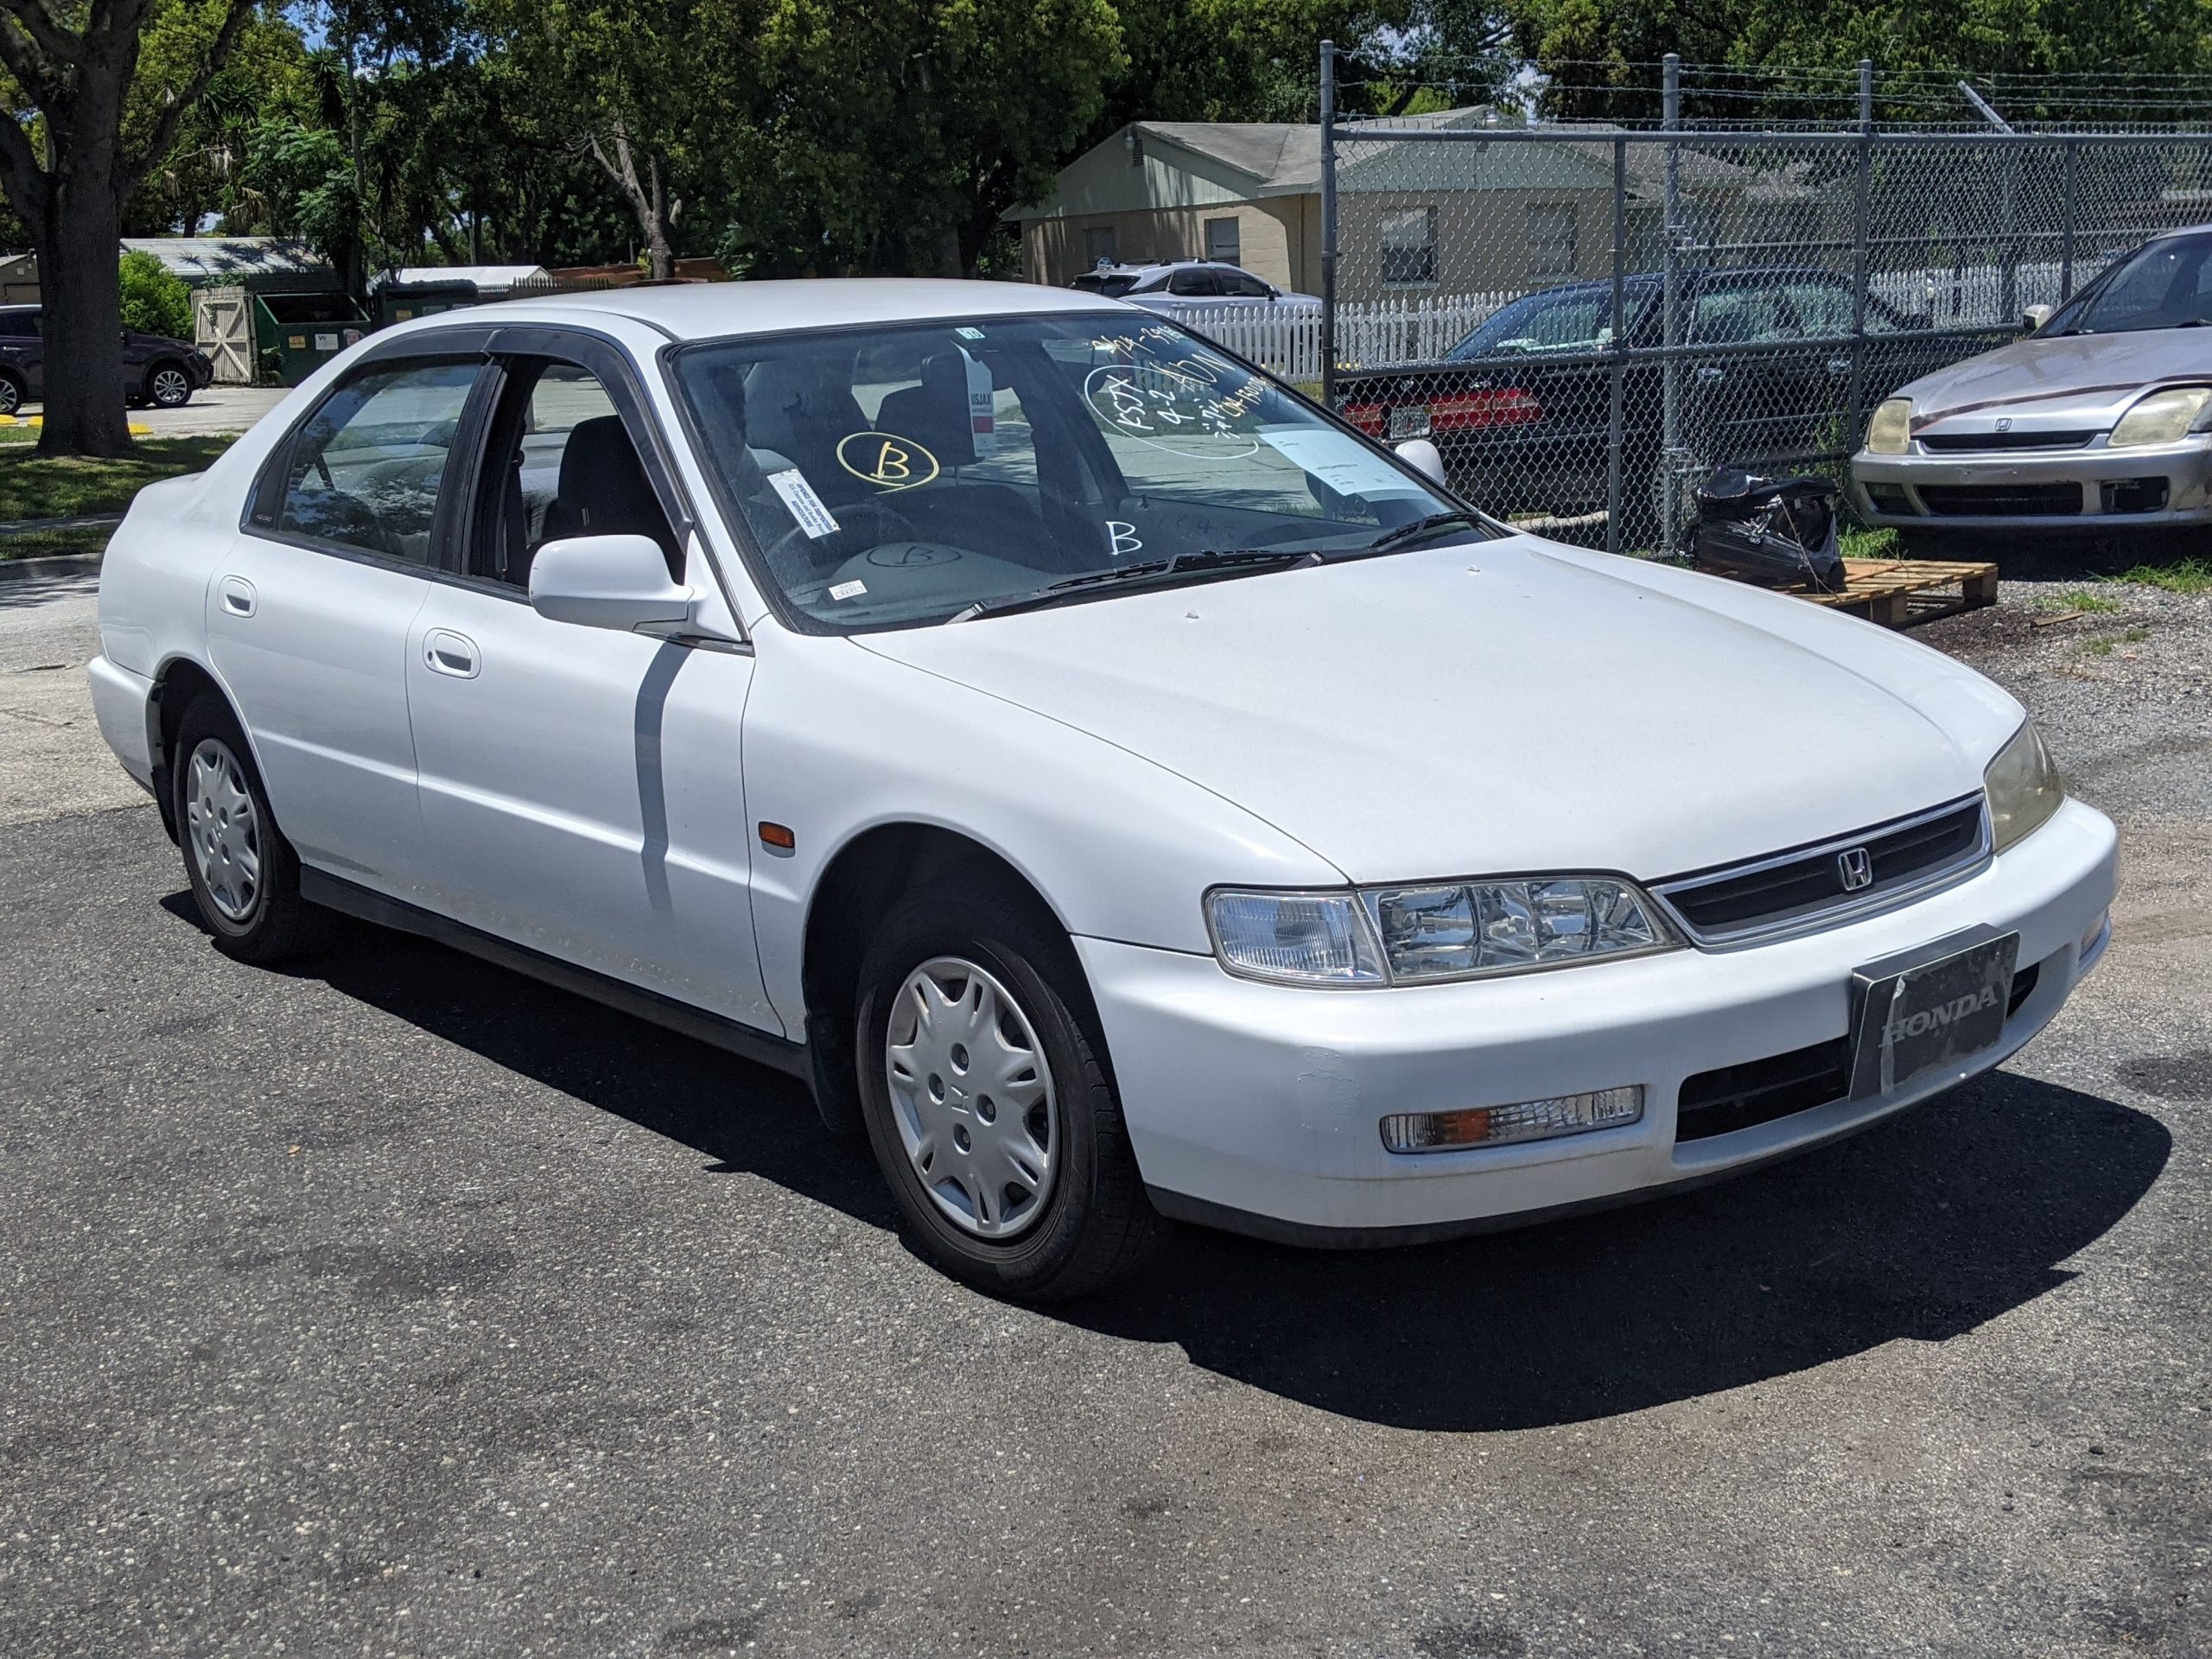 1996 Honda Accord EX for 600 What a steal  rprojectcar